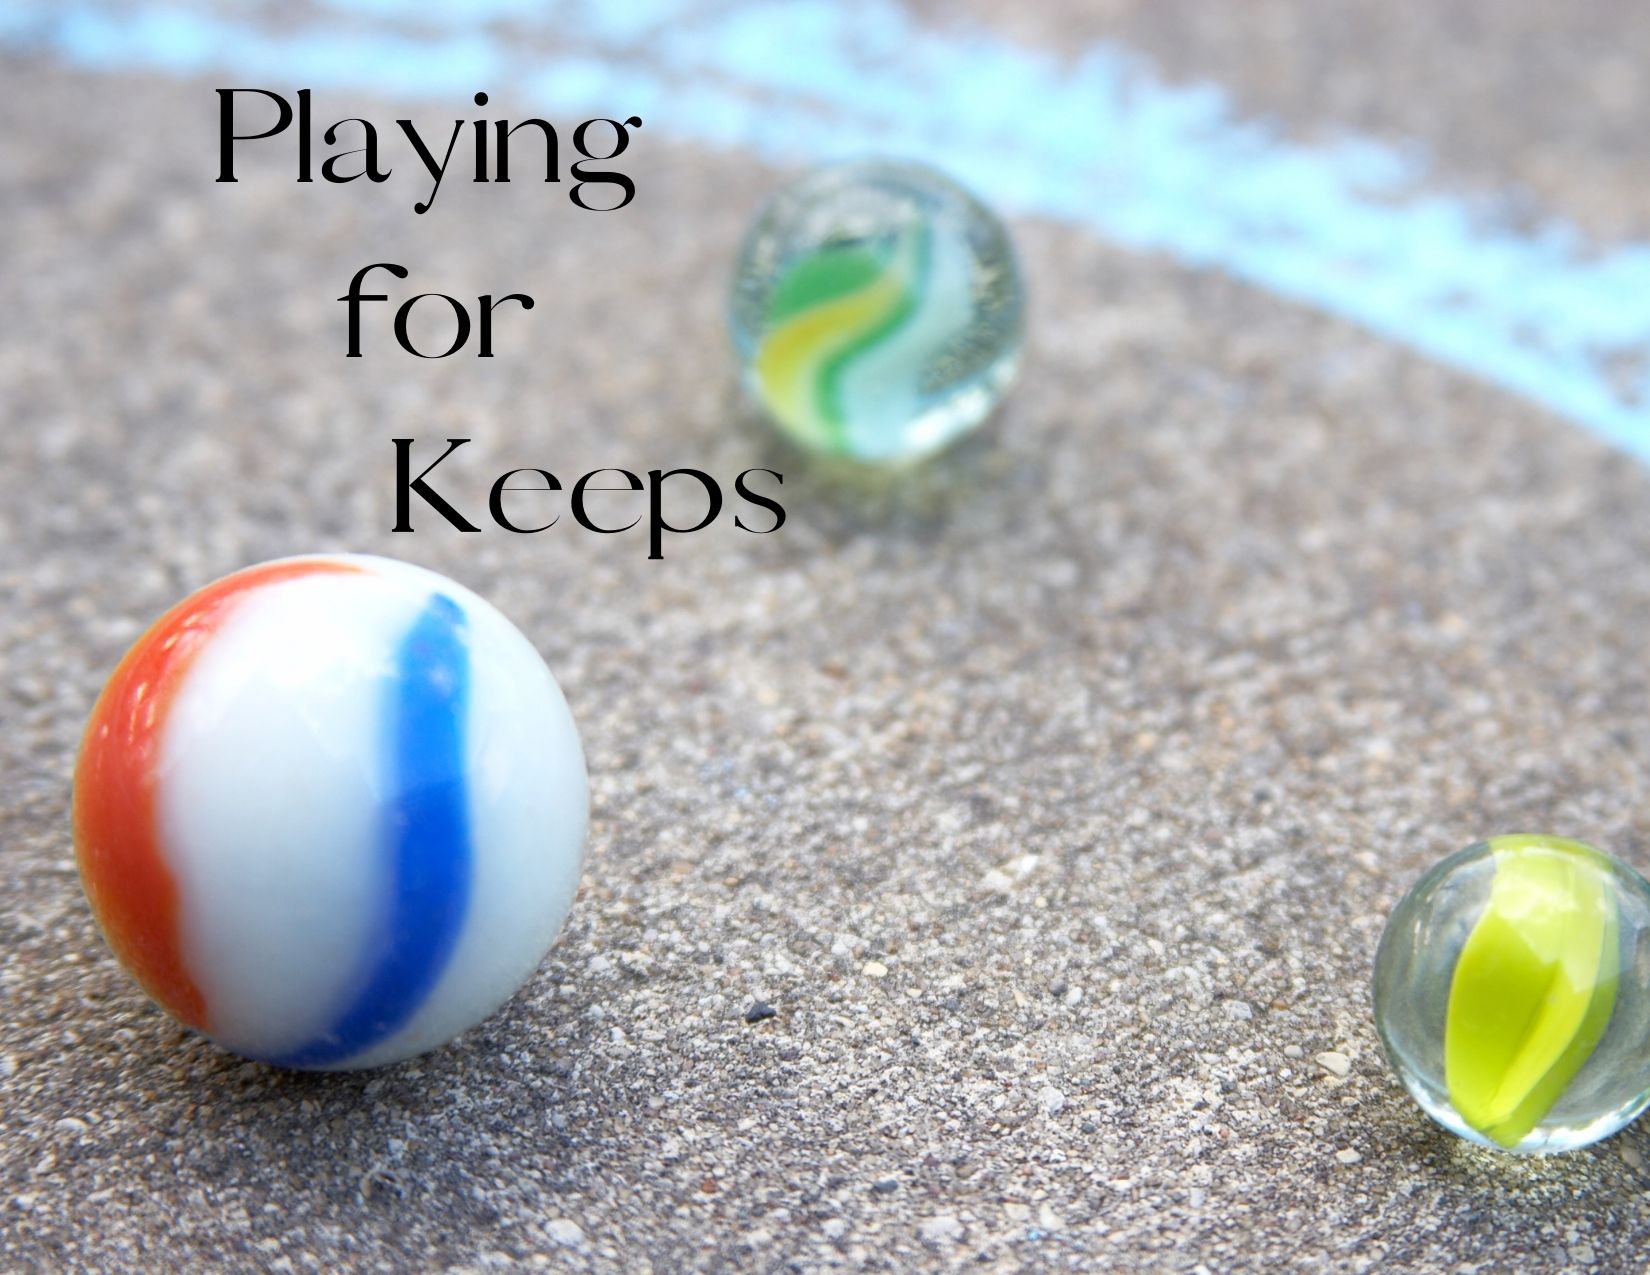 A graphic of a game of marbles to show the origin of the phrase "playing for keeps"